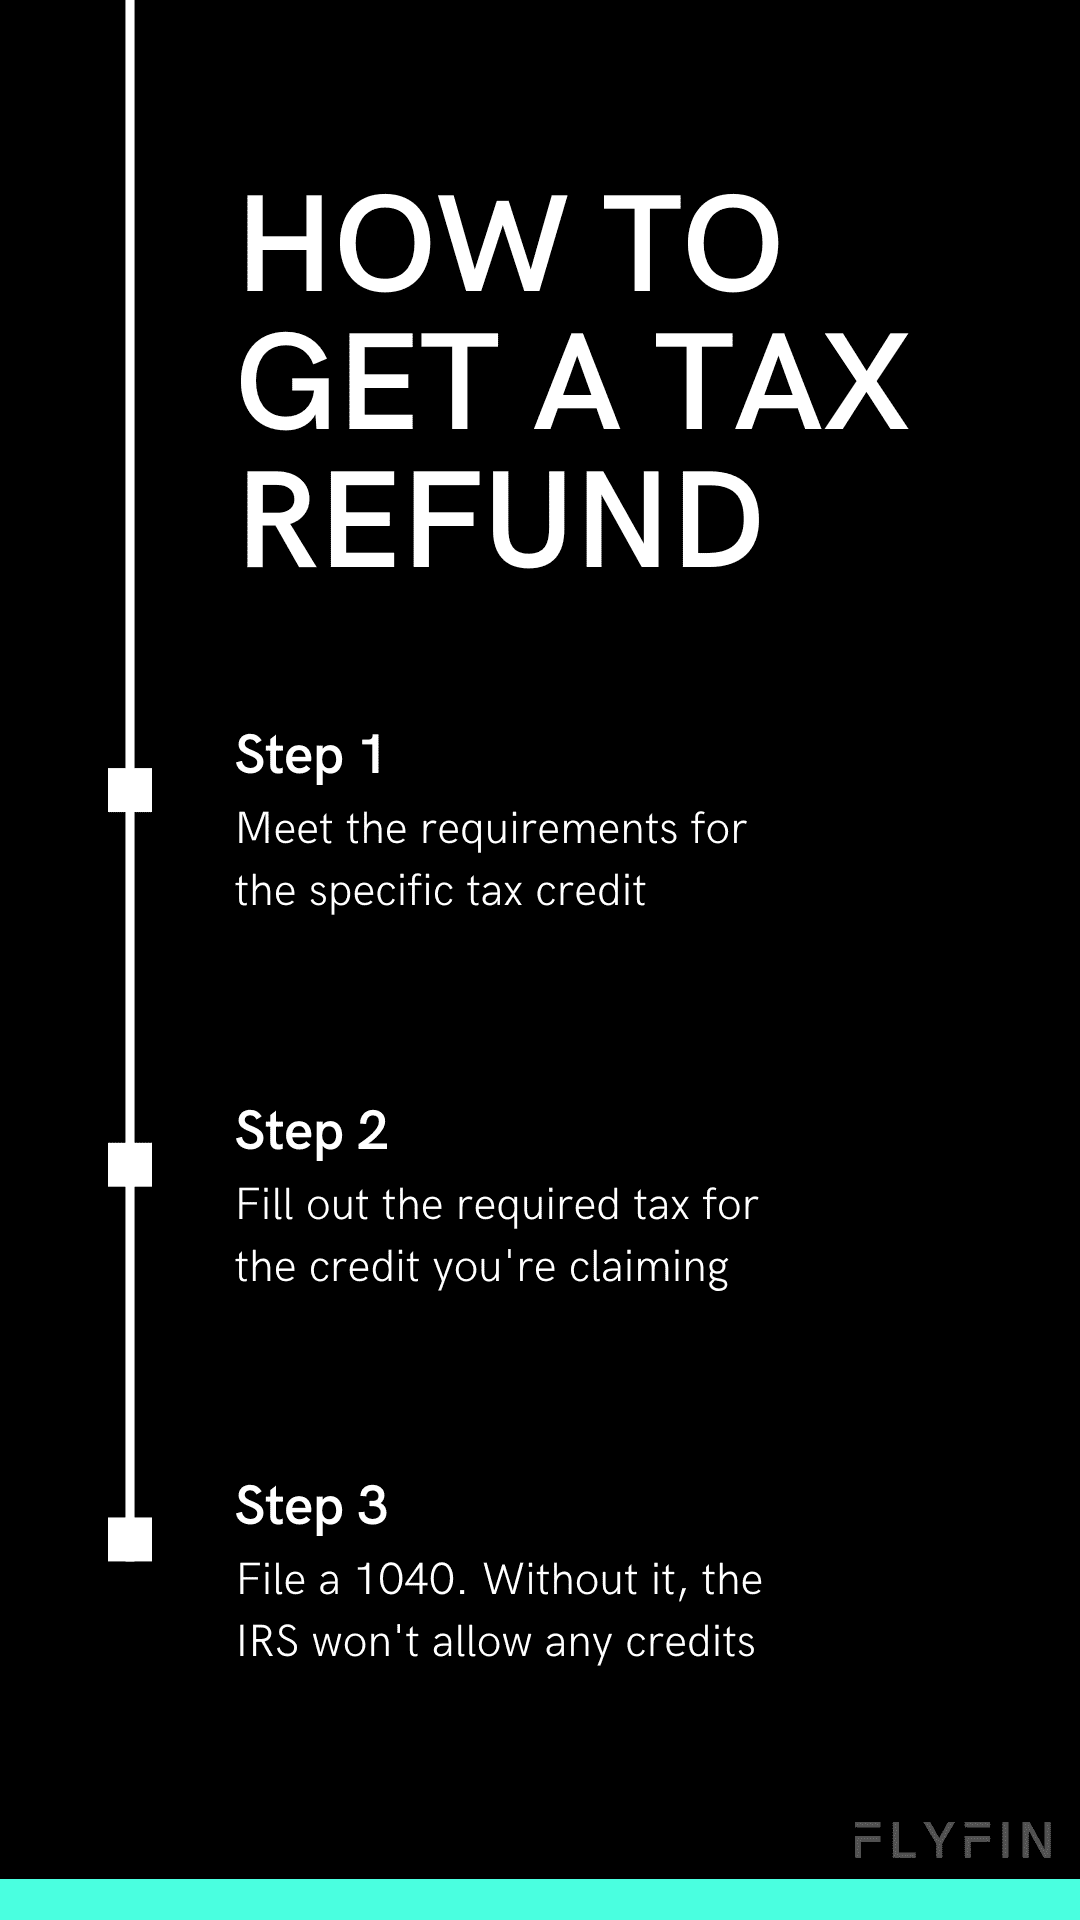 Image with text explaining how to get a tax refund by meeting requirements, filling out required tax form, and filing a 1040 with the IRS. No mention of self-employment, 1099, freelancer or taxes.